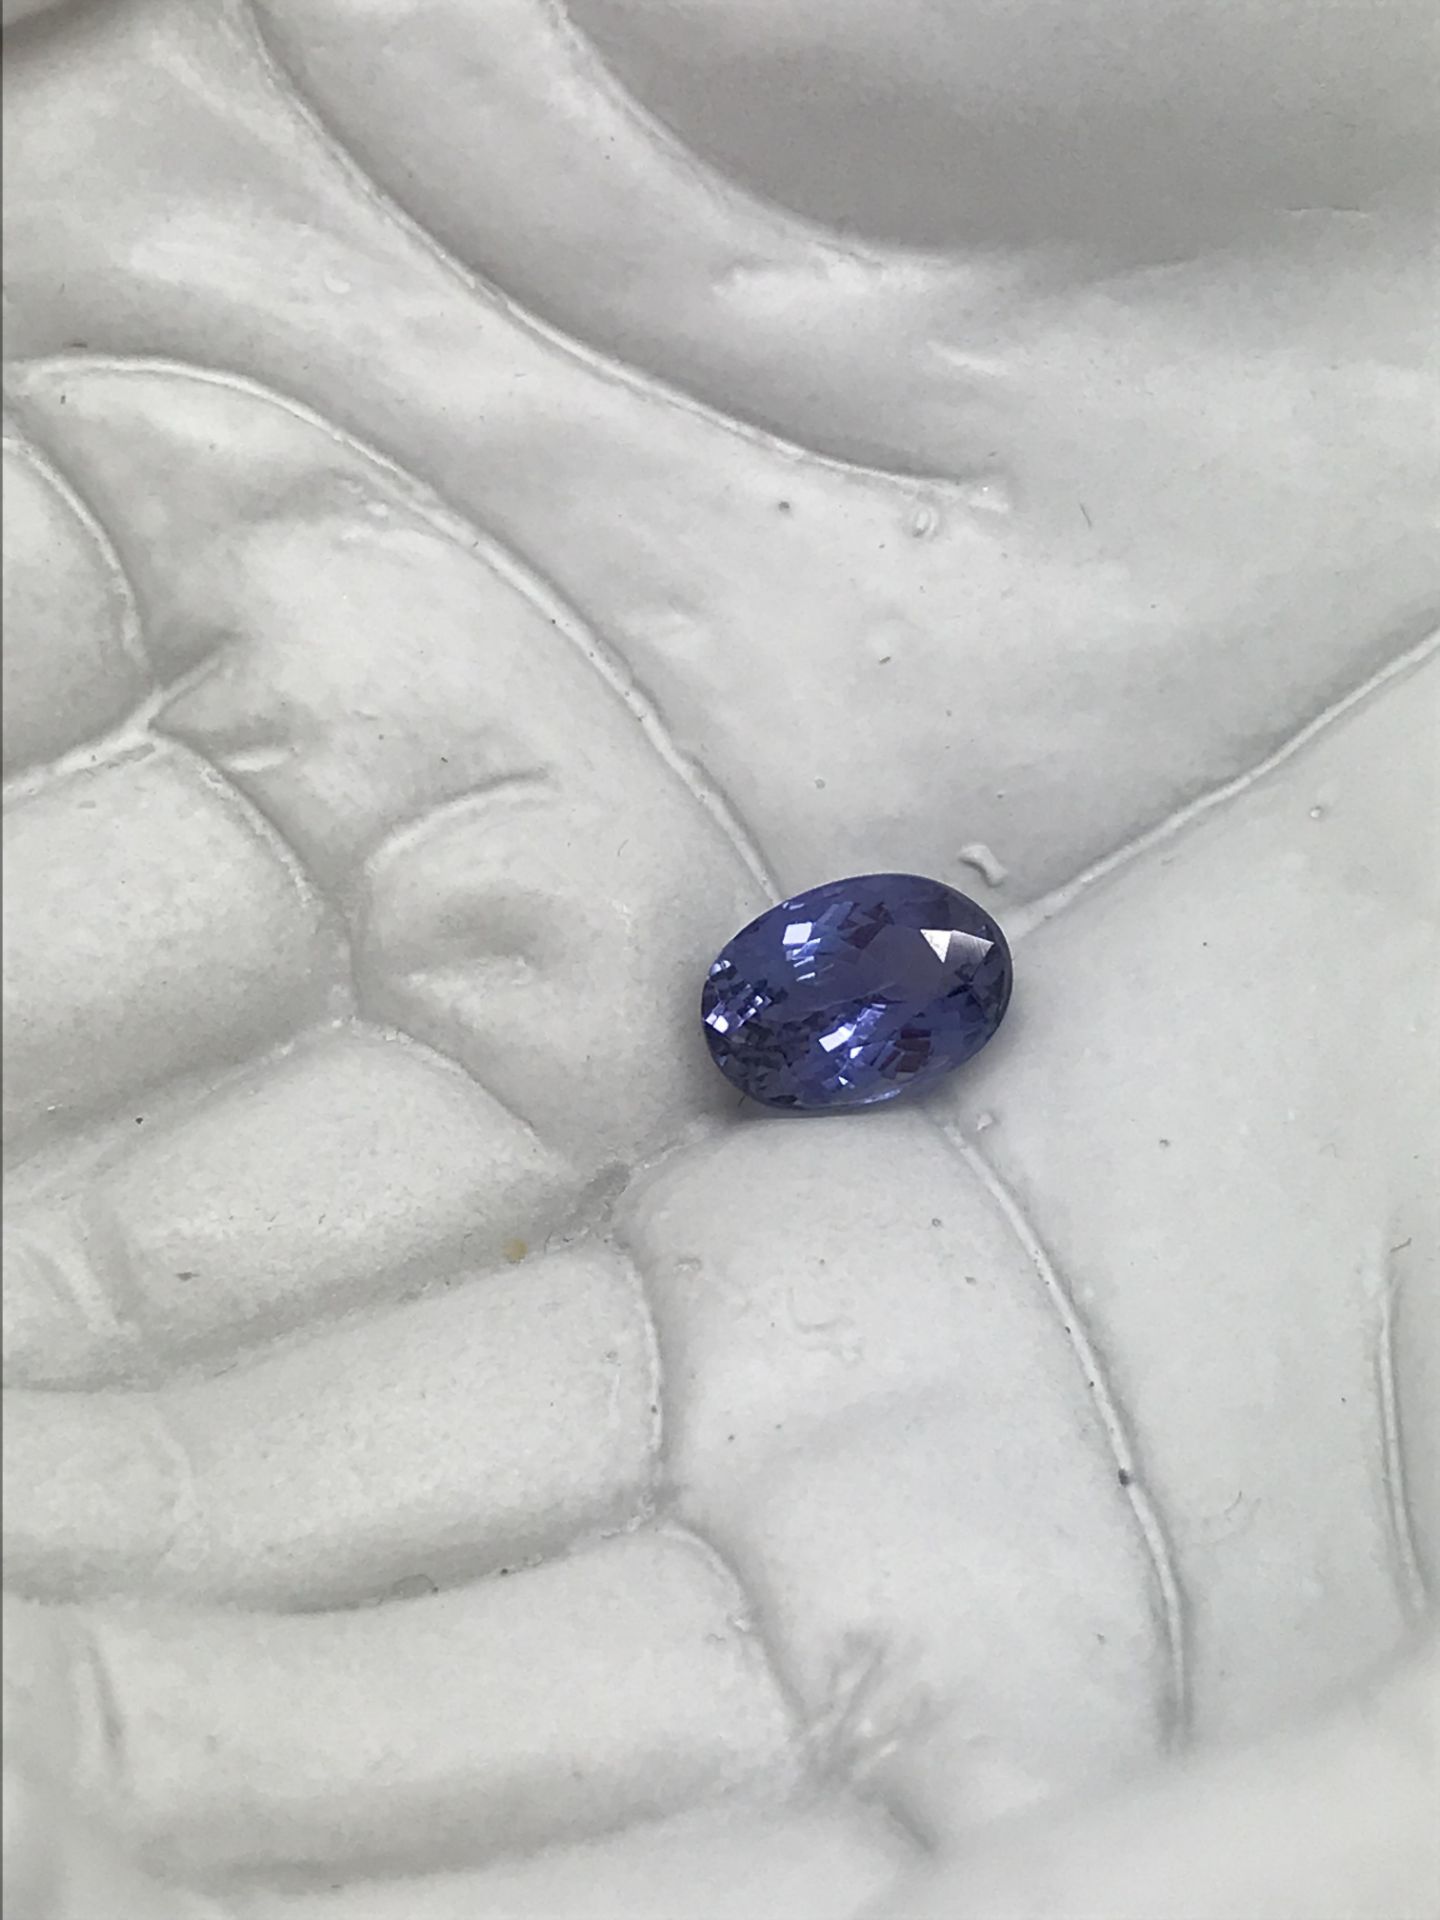 3.96CT NATURAL TANZANITE WITH $700 VALUATION - Image 3 of 4